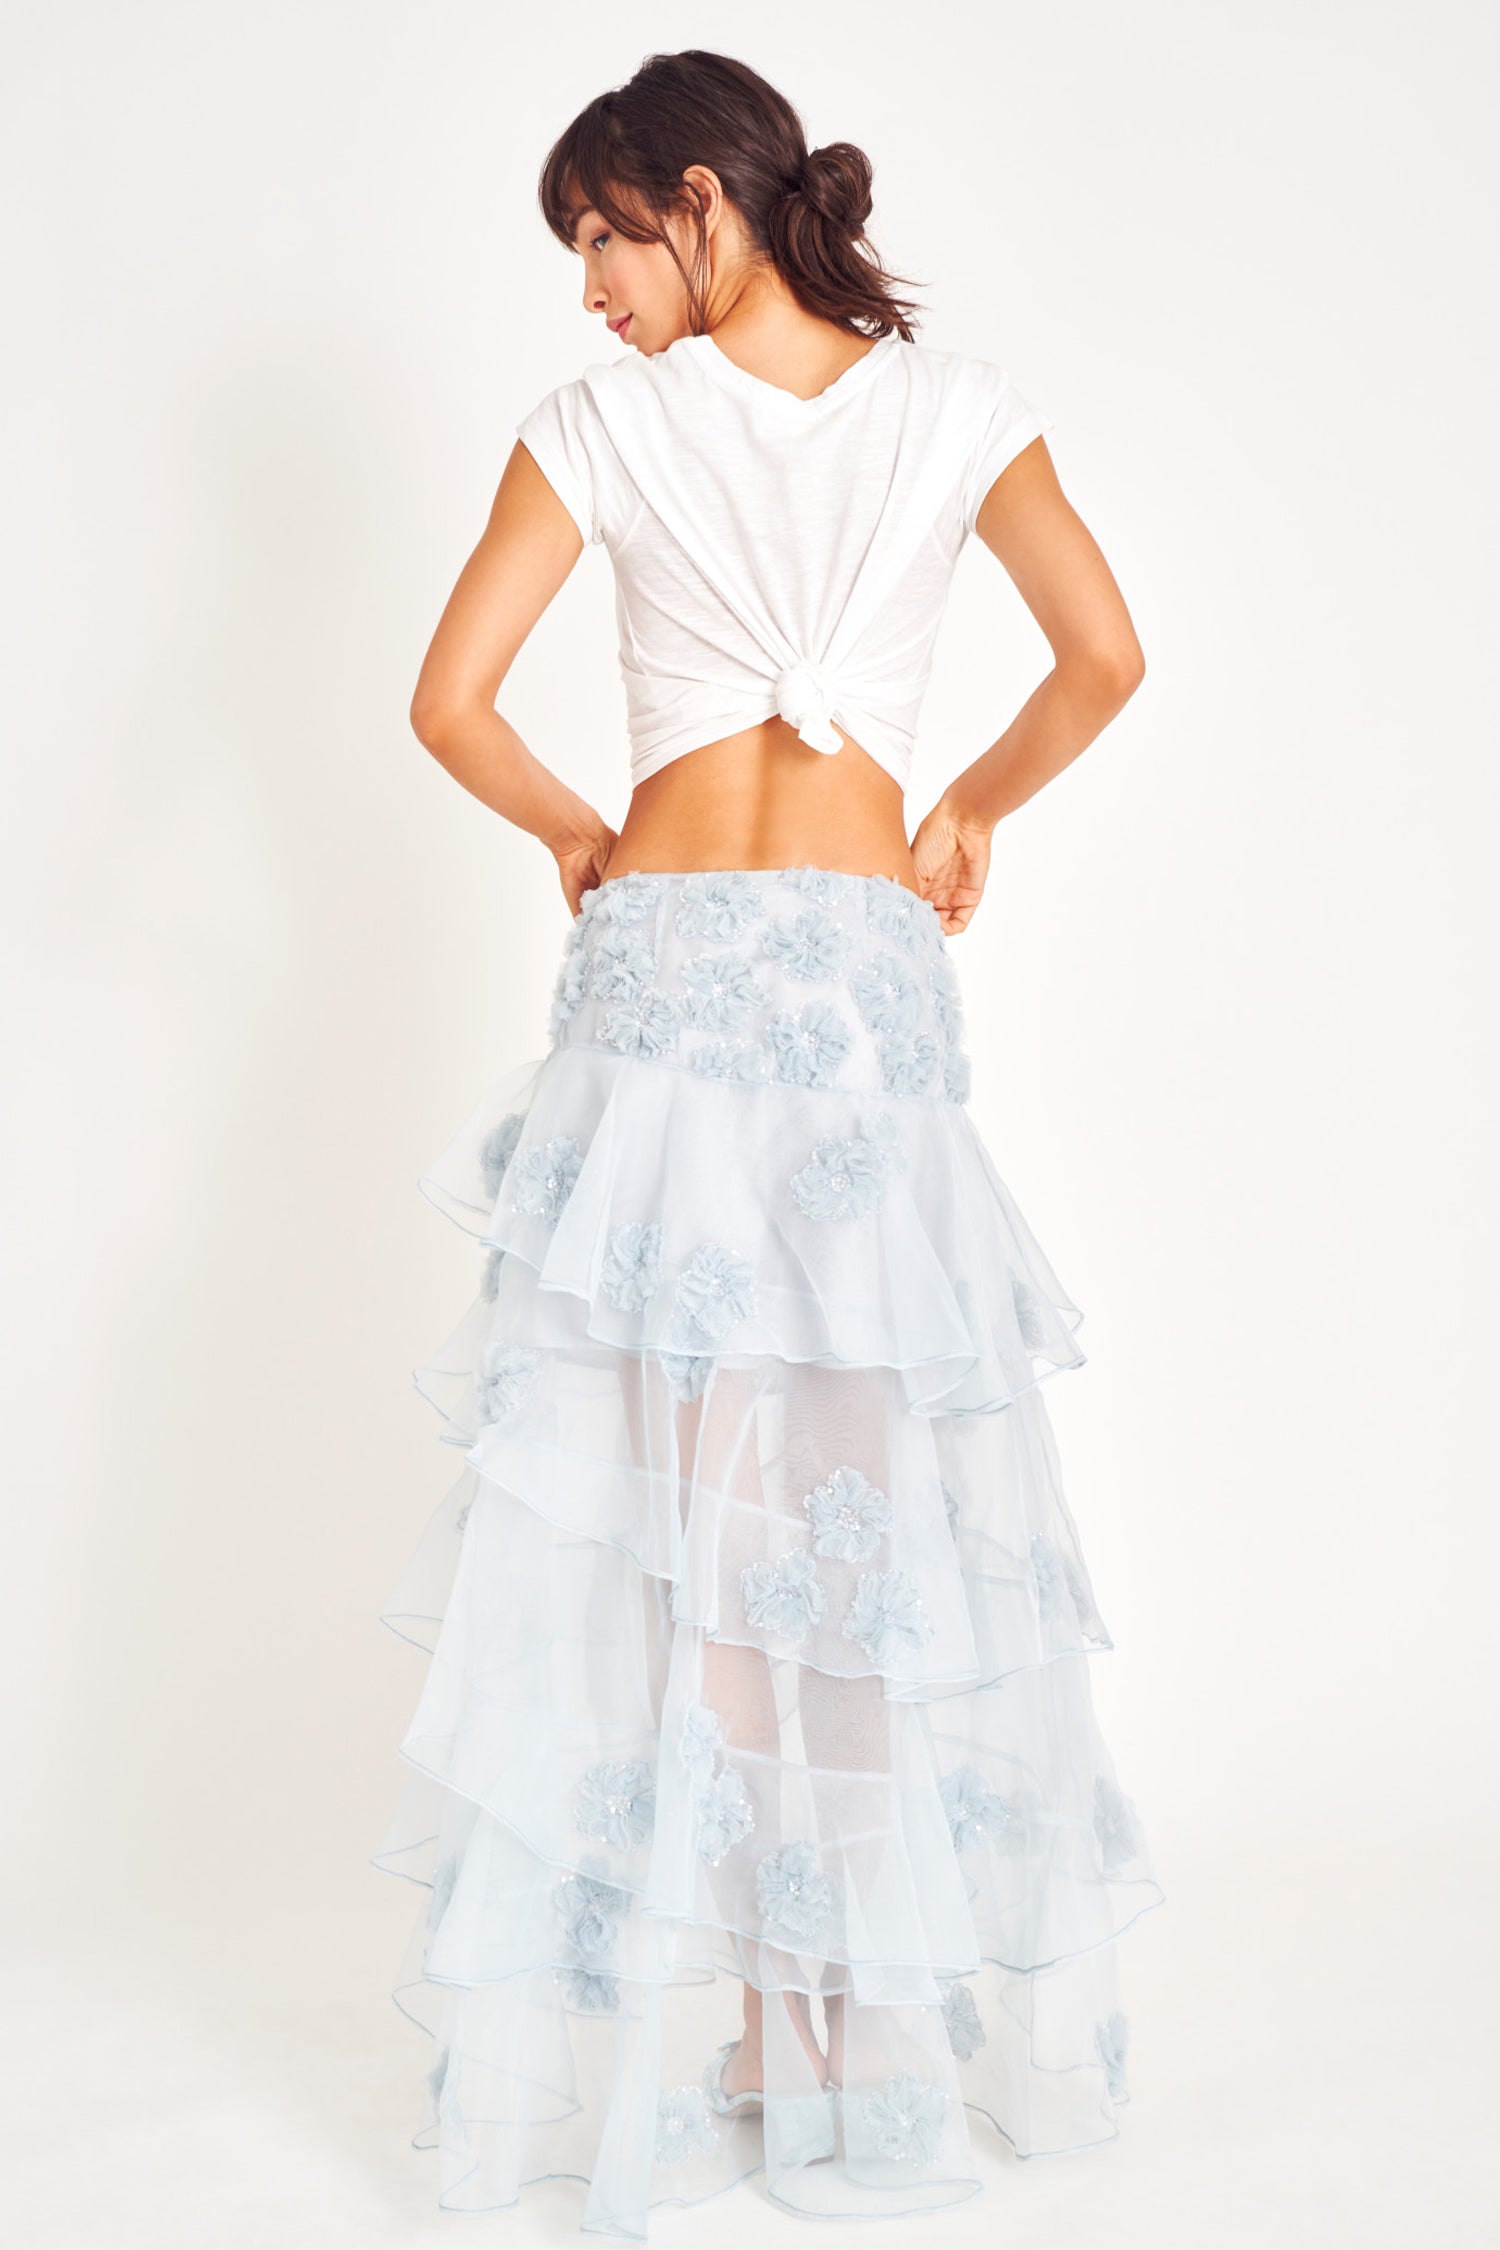 Voluminous tier blue maxi skirt with waist tie and embellishments.